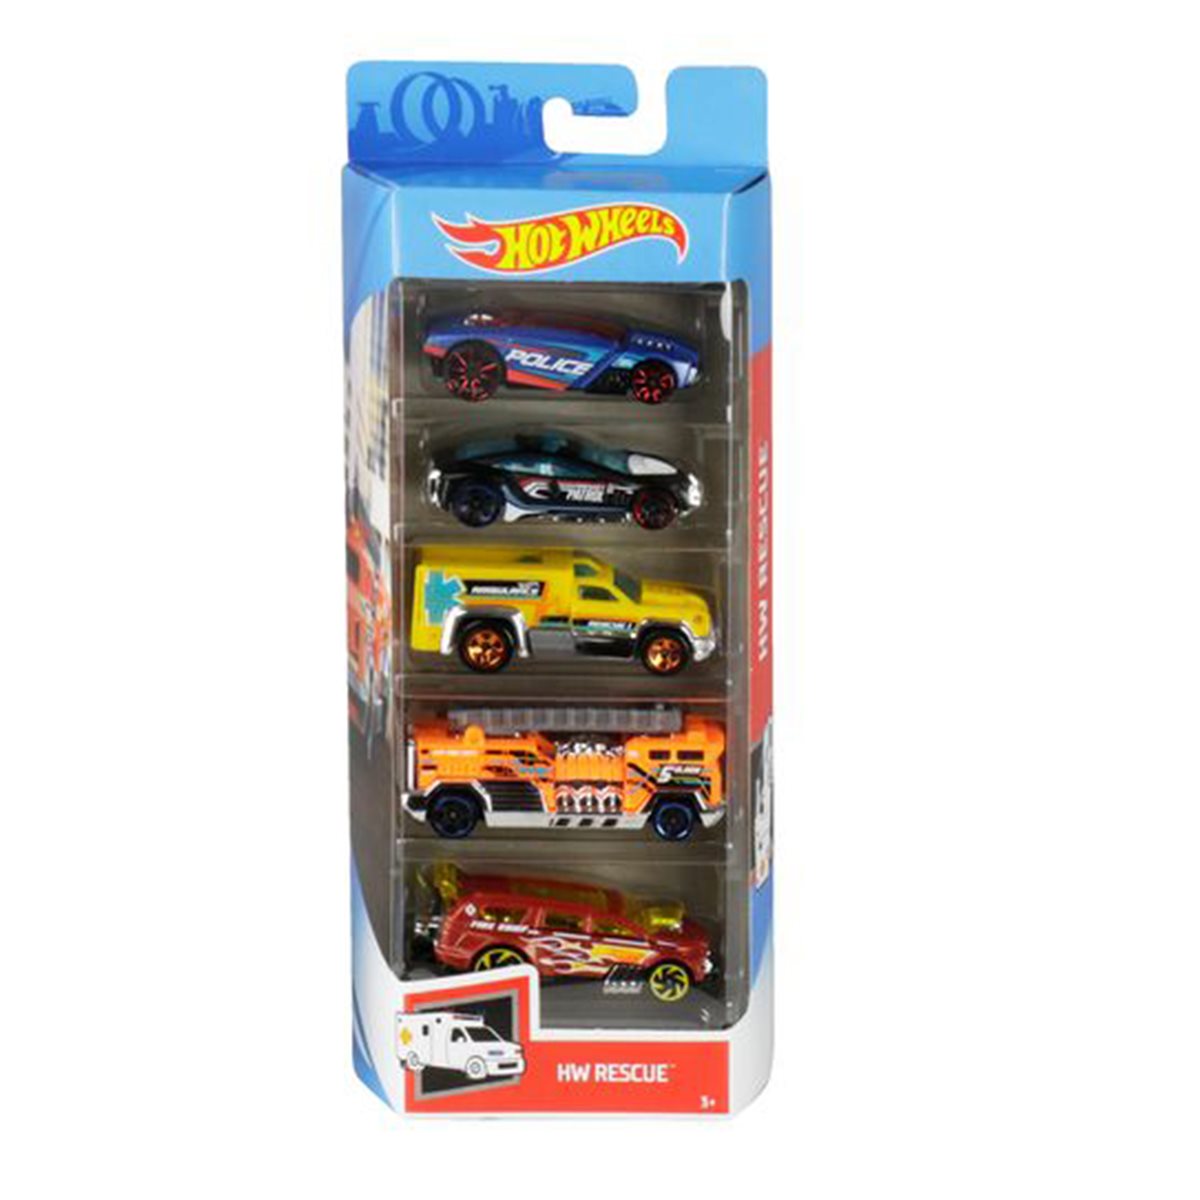 2017 Hot Wheels RESCUE DUTY✰EMERGENCY✰Target Exclusive RED EDITION 4✰Factory Set